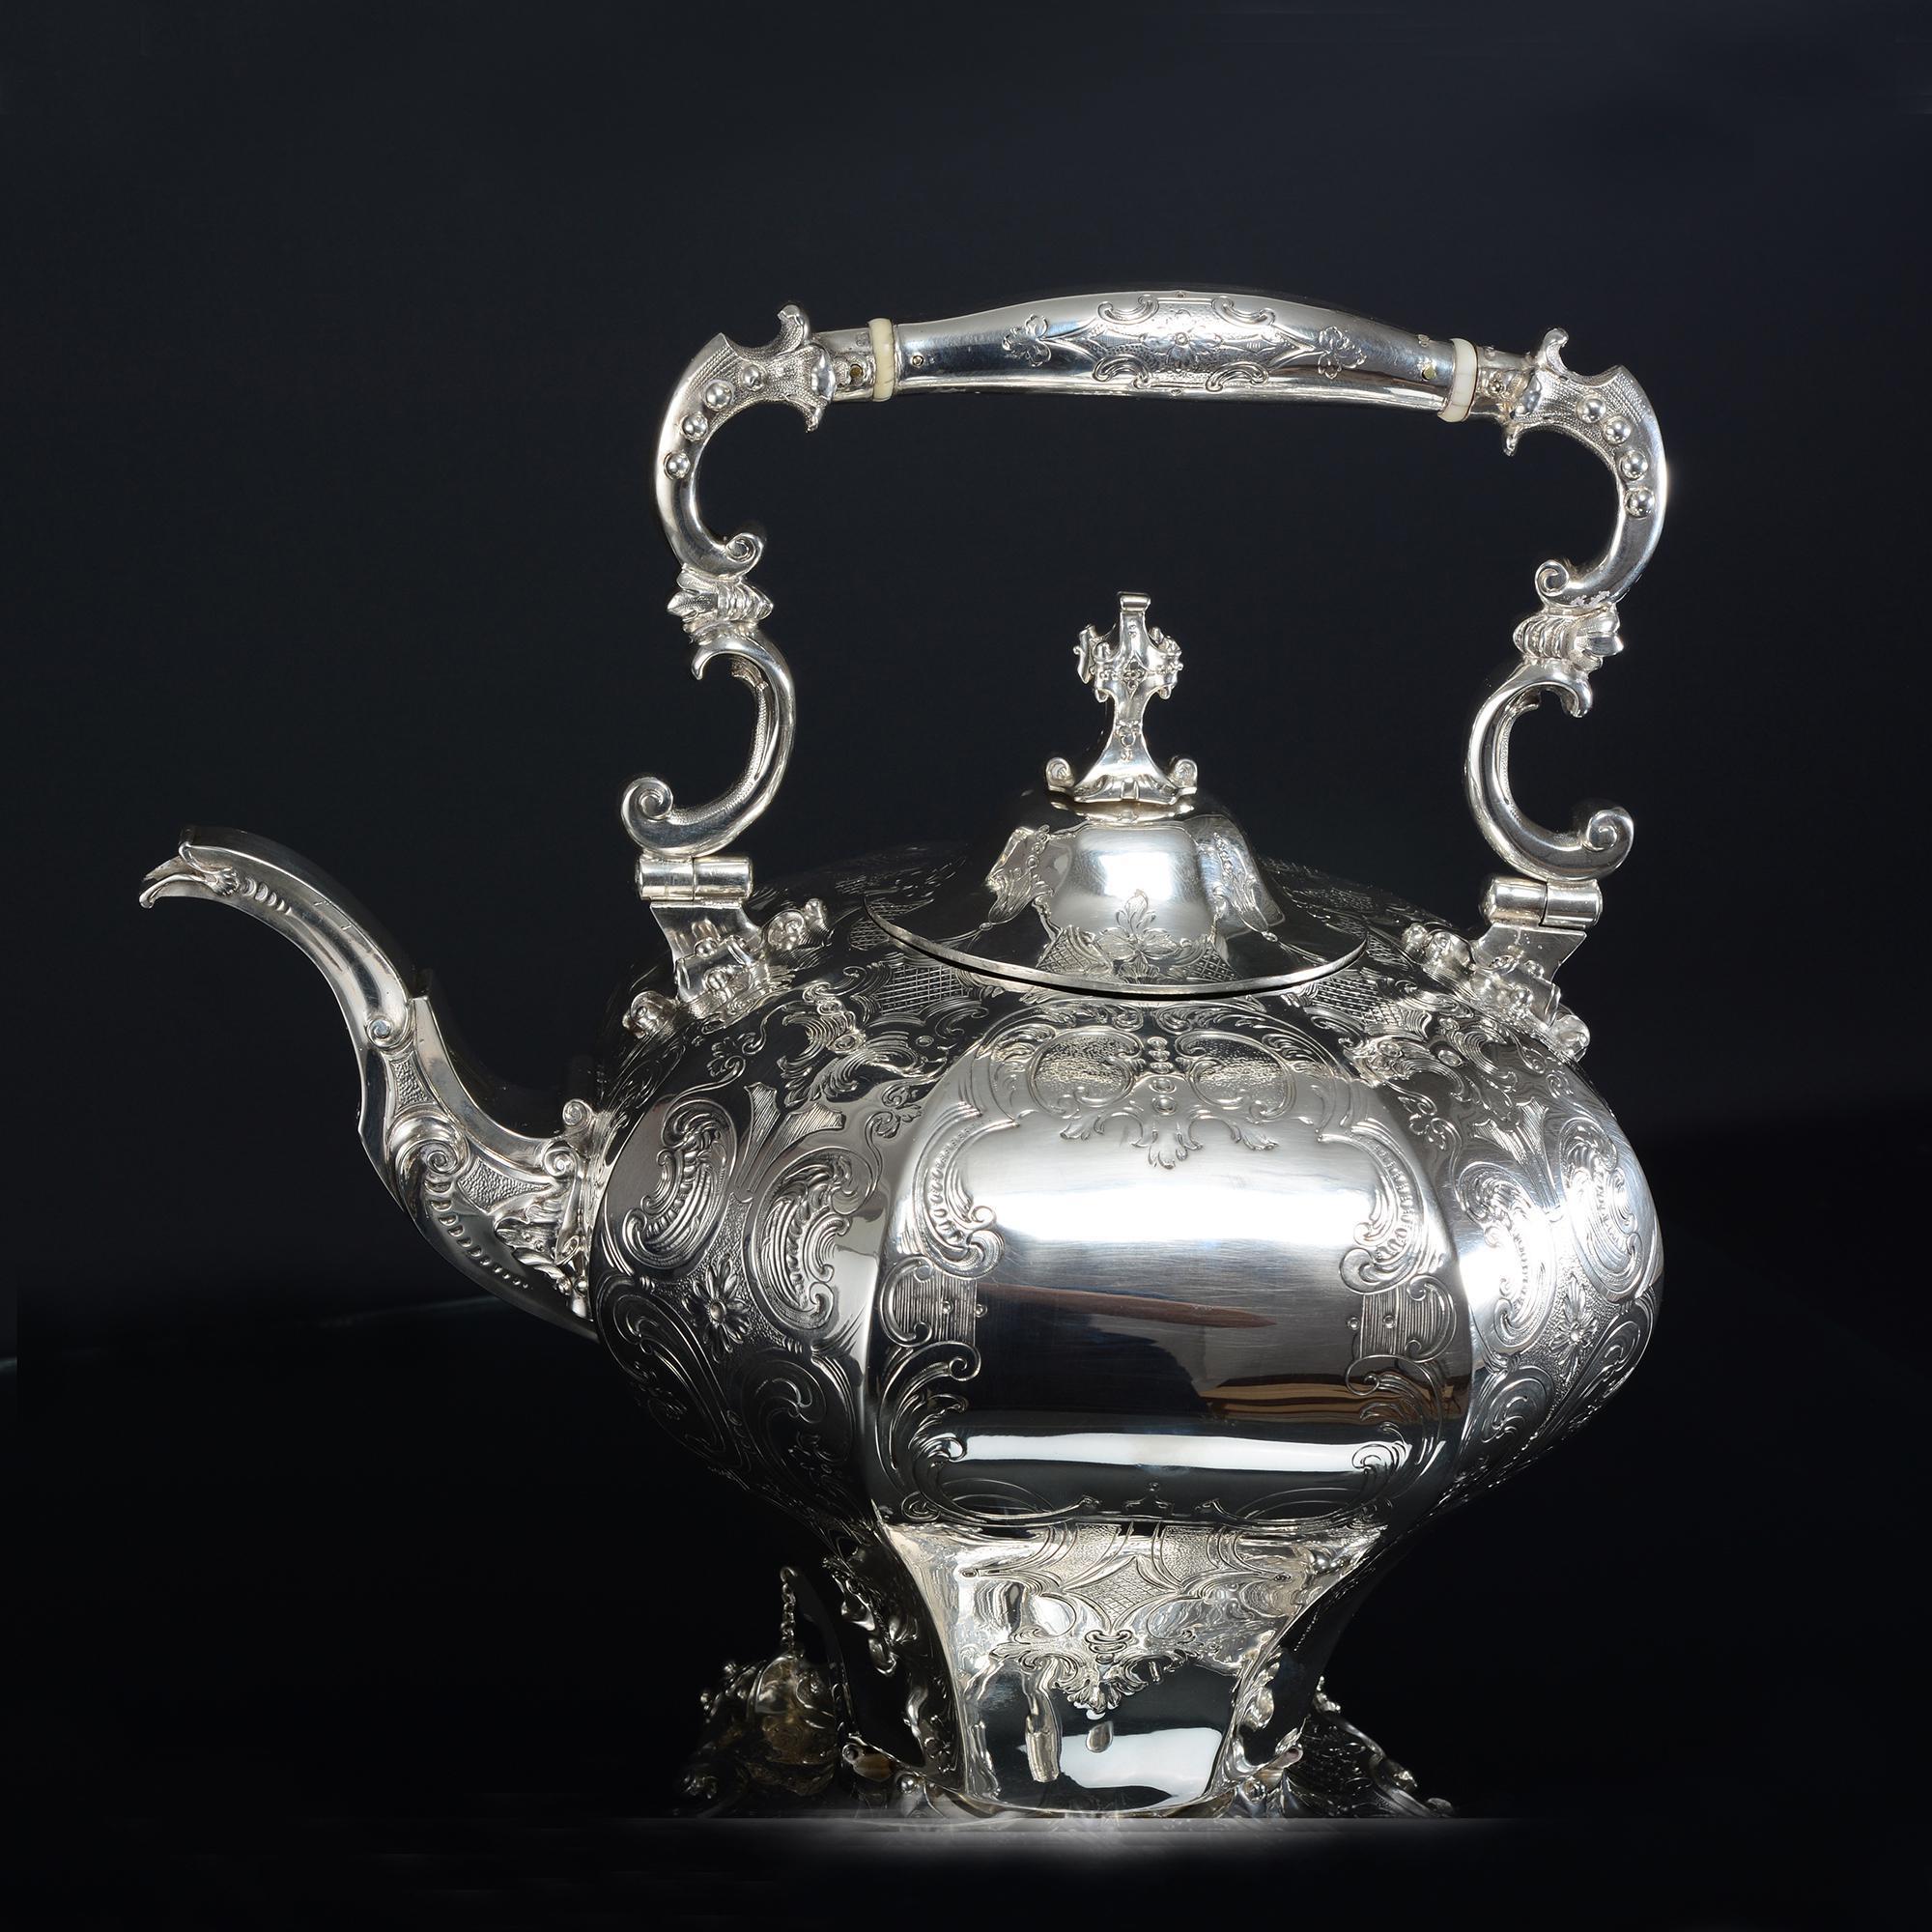 Superb Victorian silver kettle, octagonal in form with beautifully hand-chased decoration of scrolls, stylised leaves and flower heads. The silver kettle's body is mounted on a cast and hand-chased, four-legged frame and is held in place by two